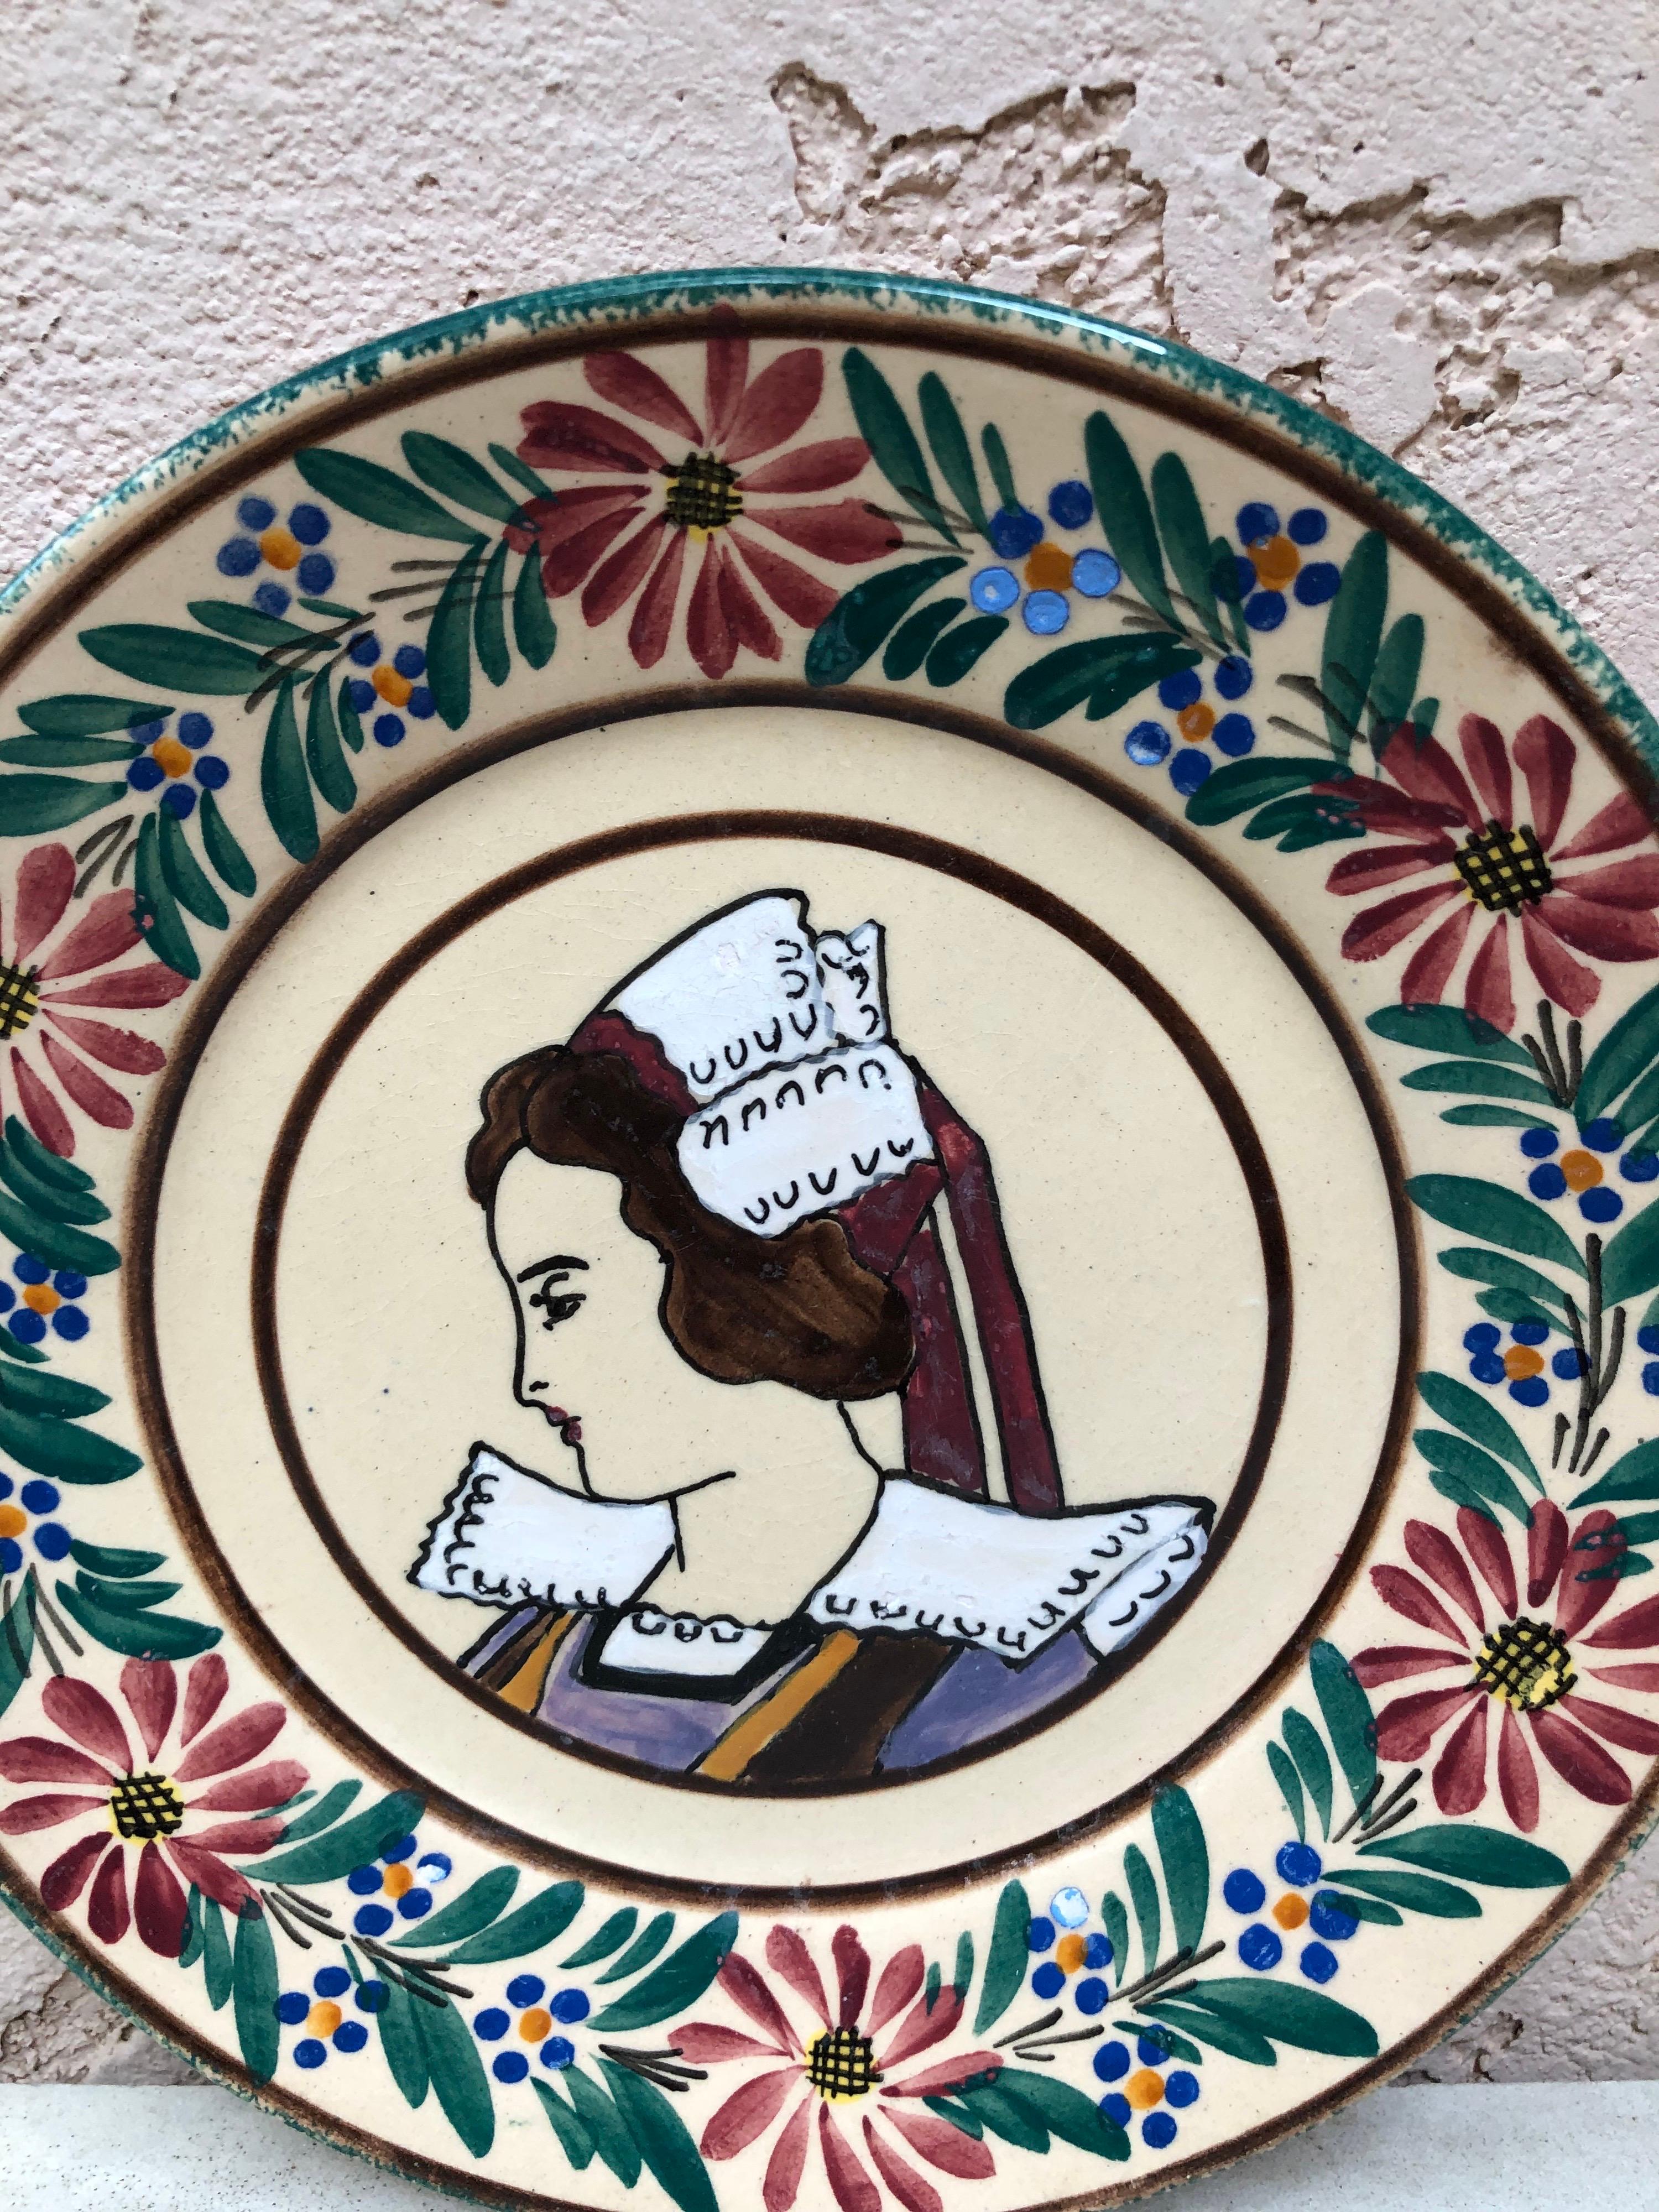 French faience plate Quimper, circa 1920
Border with flowers, representing a woman with the traditional costume of Brittany.